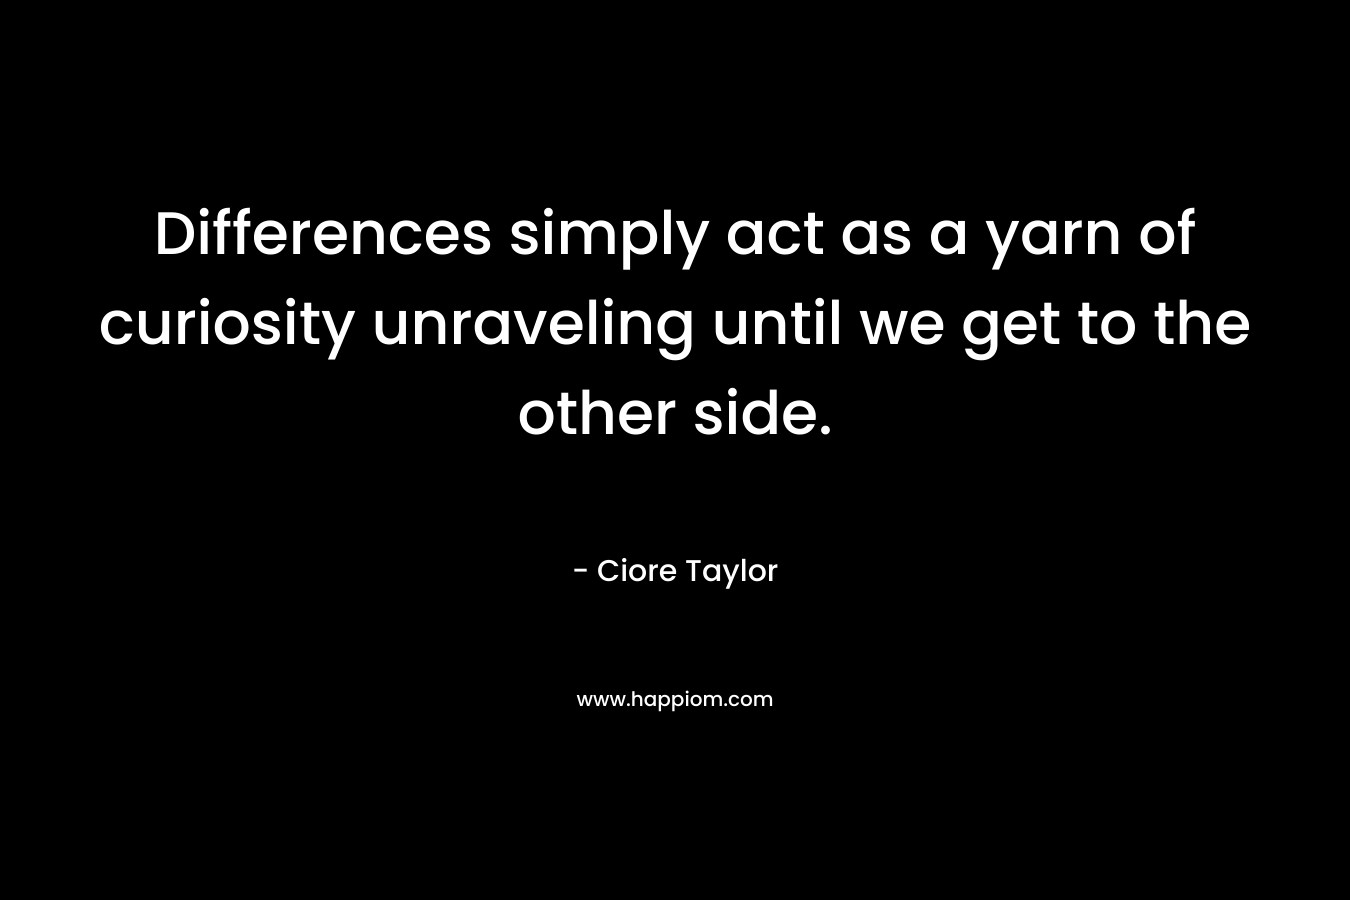 Differences simply act as a yarn of curiosity unraveling until we get to the other side. – Ciore Taylor